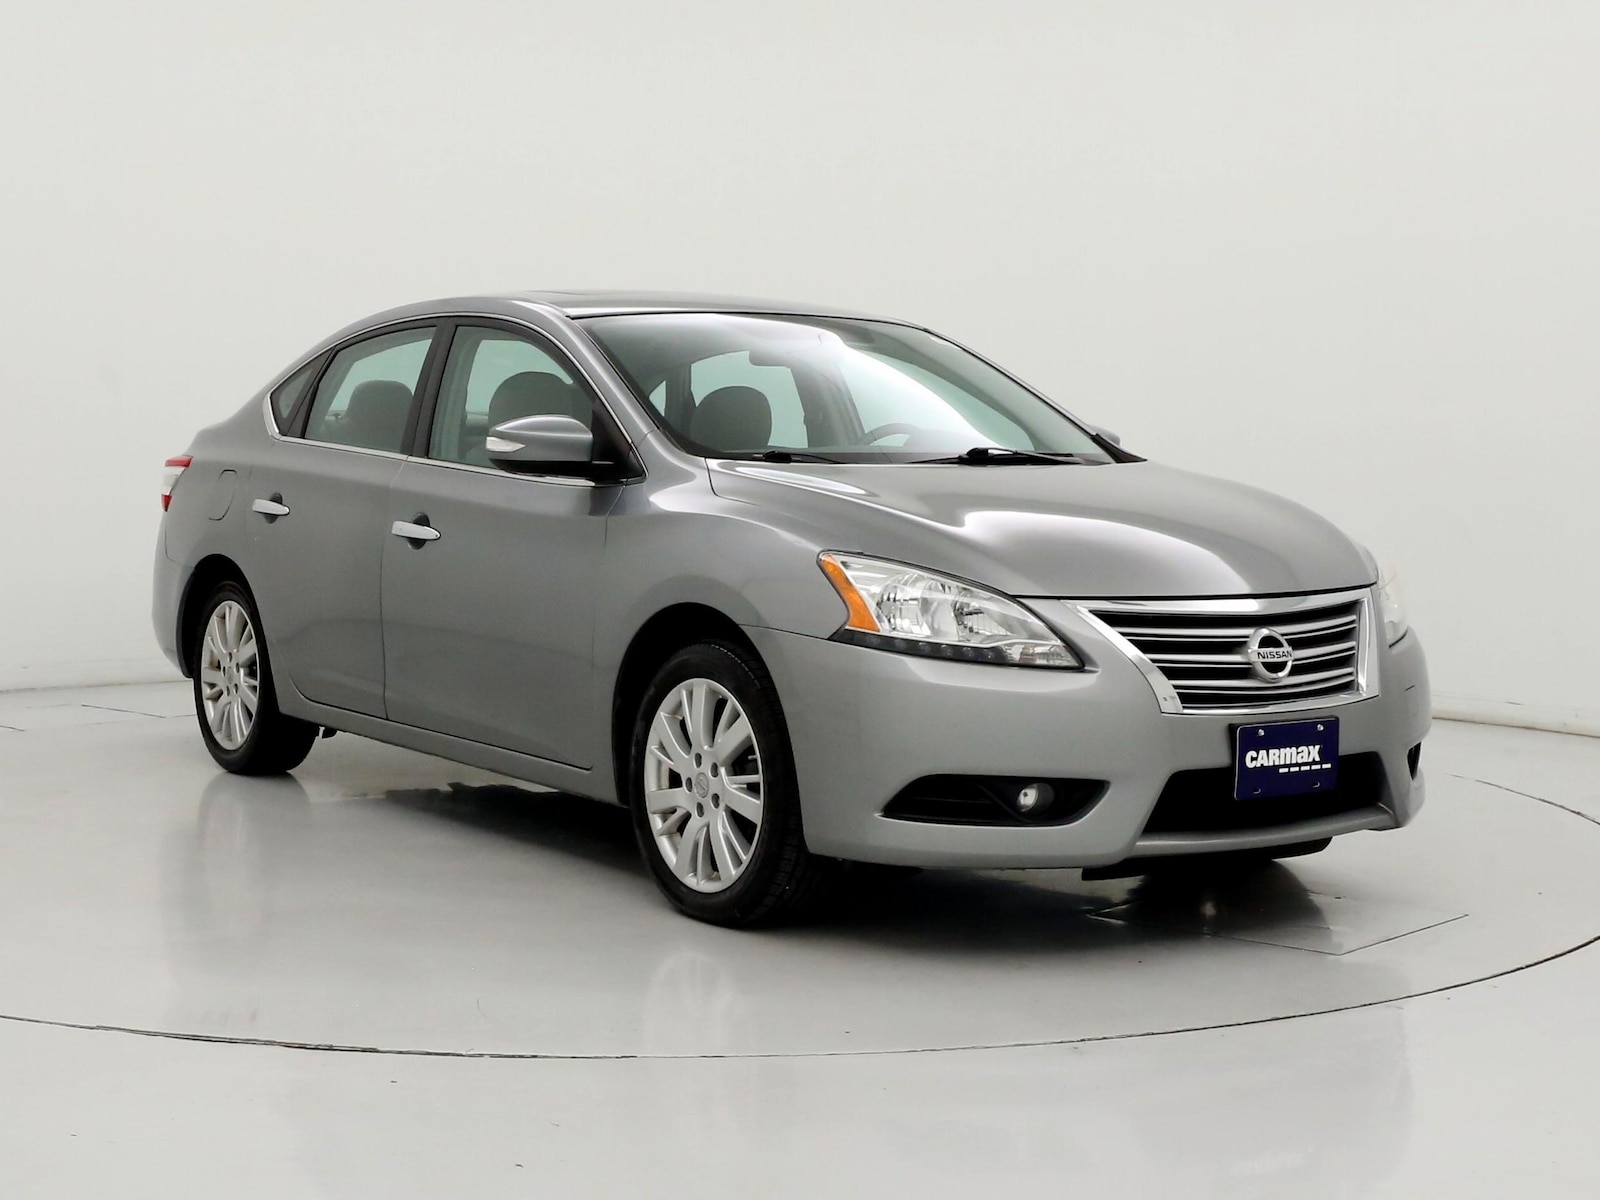 Used 2013 Nissan Sentra SL with VIN 3N1AB7AP7DL660163 for sale in Spokane Valley, WA